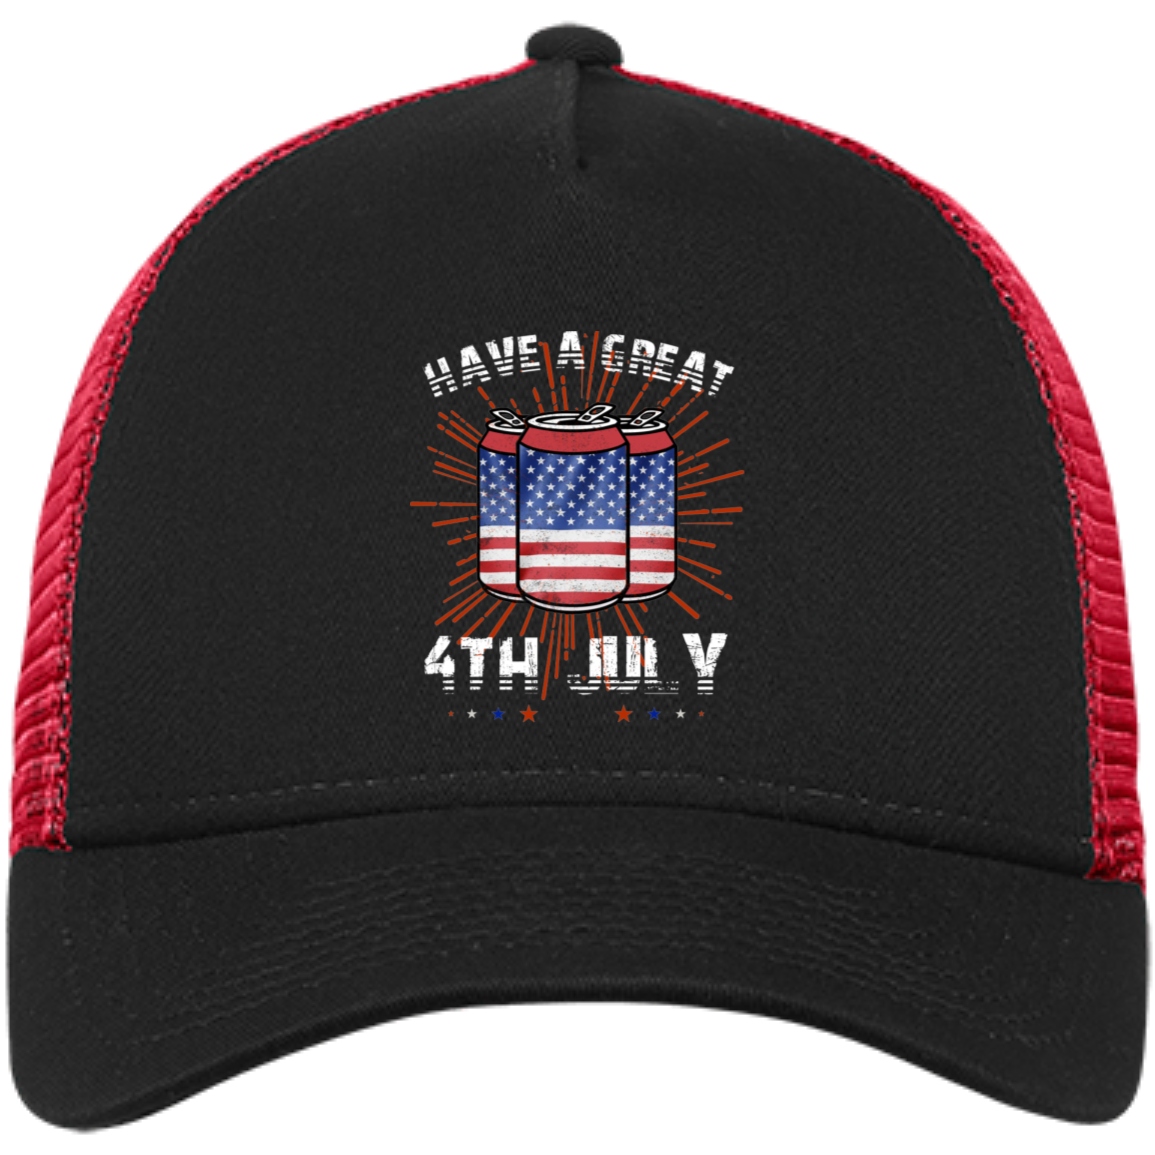 HAVE A GREAT 4TH CAN Snapback Trucker Cap